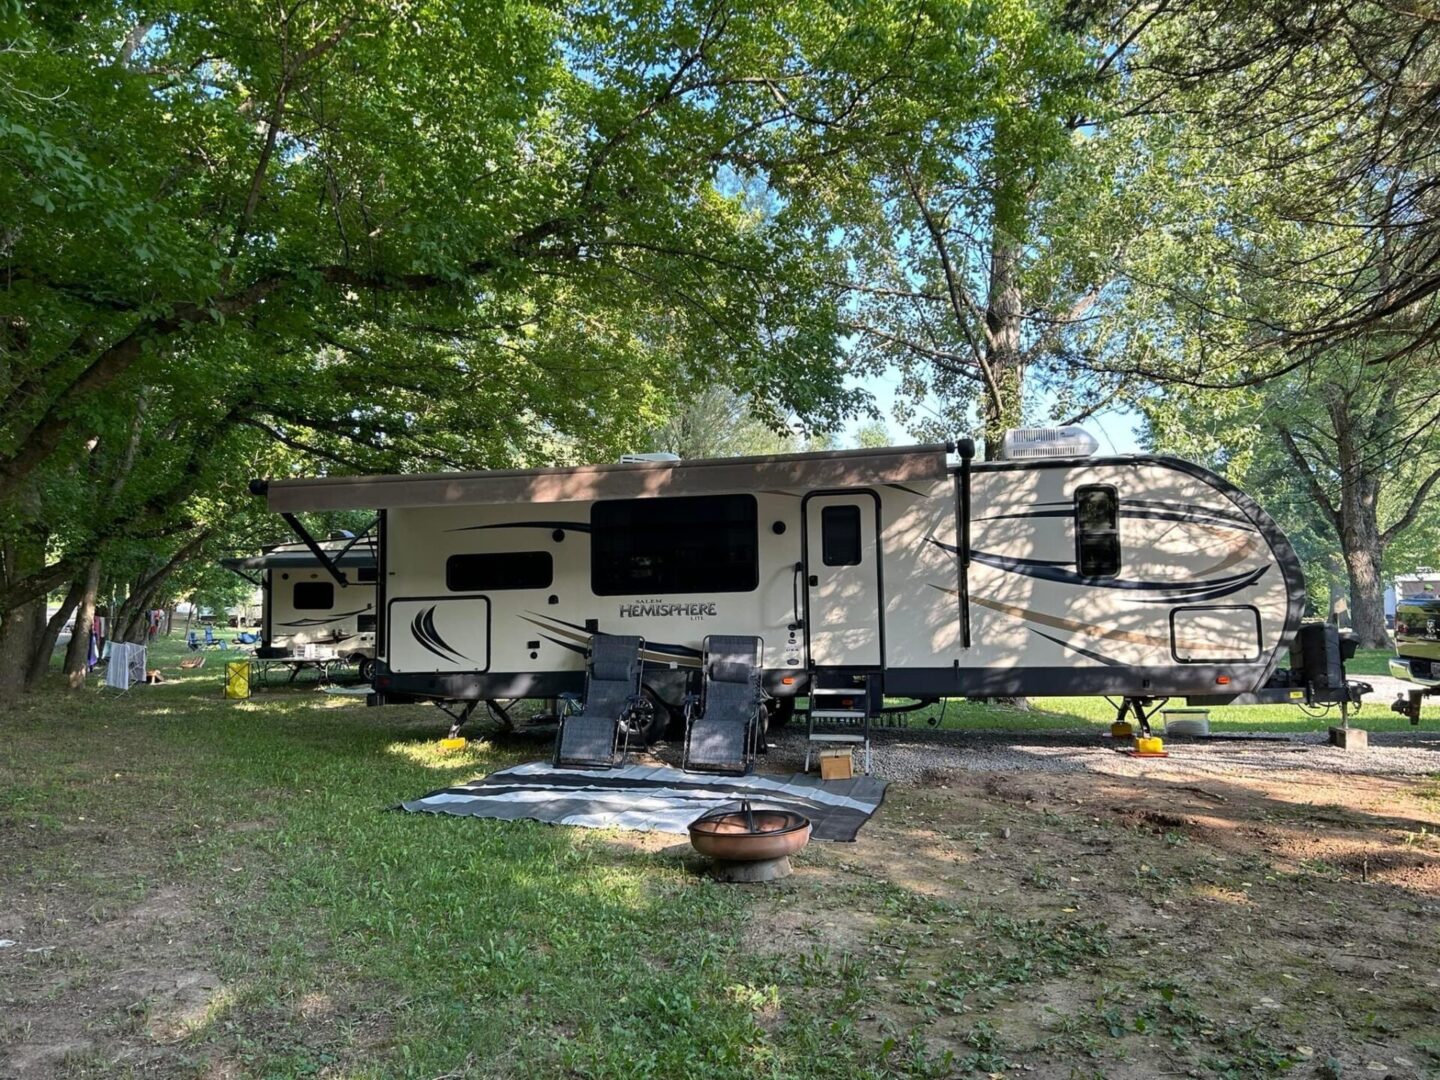 A recreational vehicle (rv) parked in a shaded campsite with trees, featuring an extended awning and a small fire pit in front.